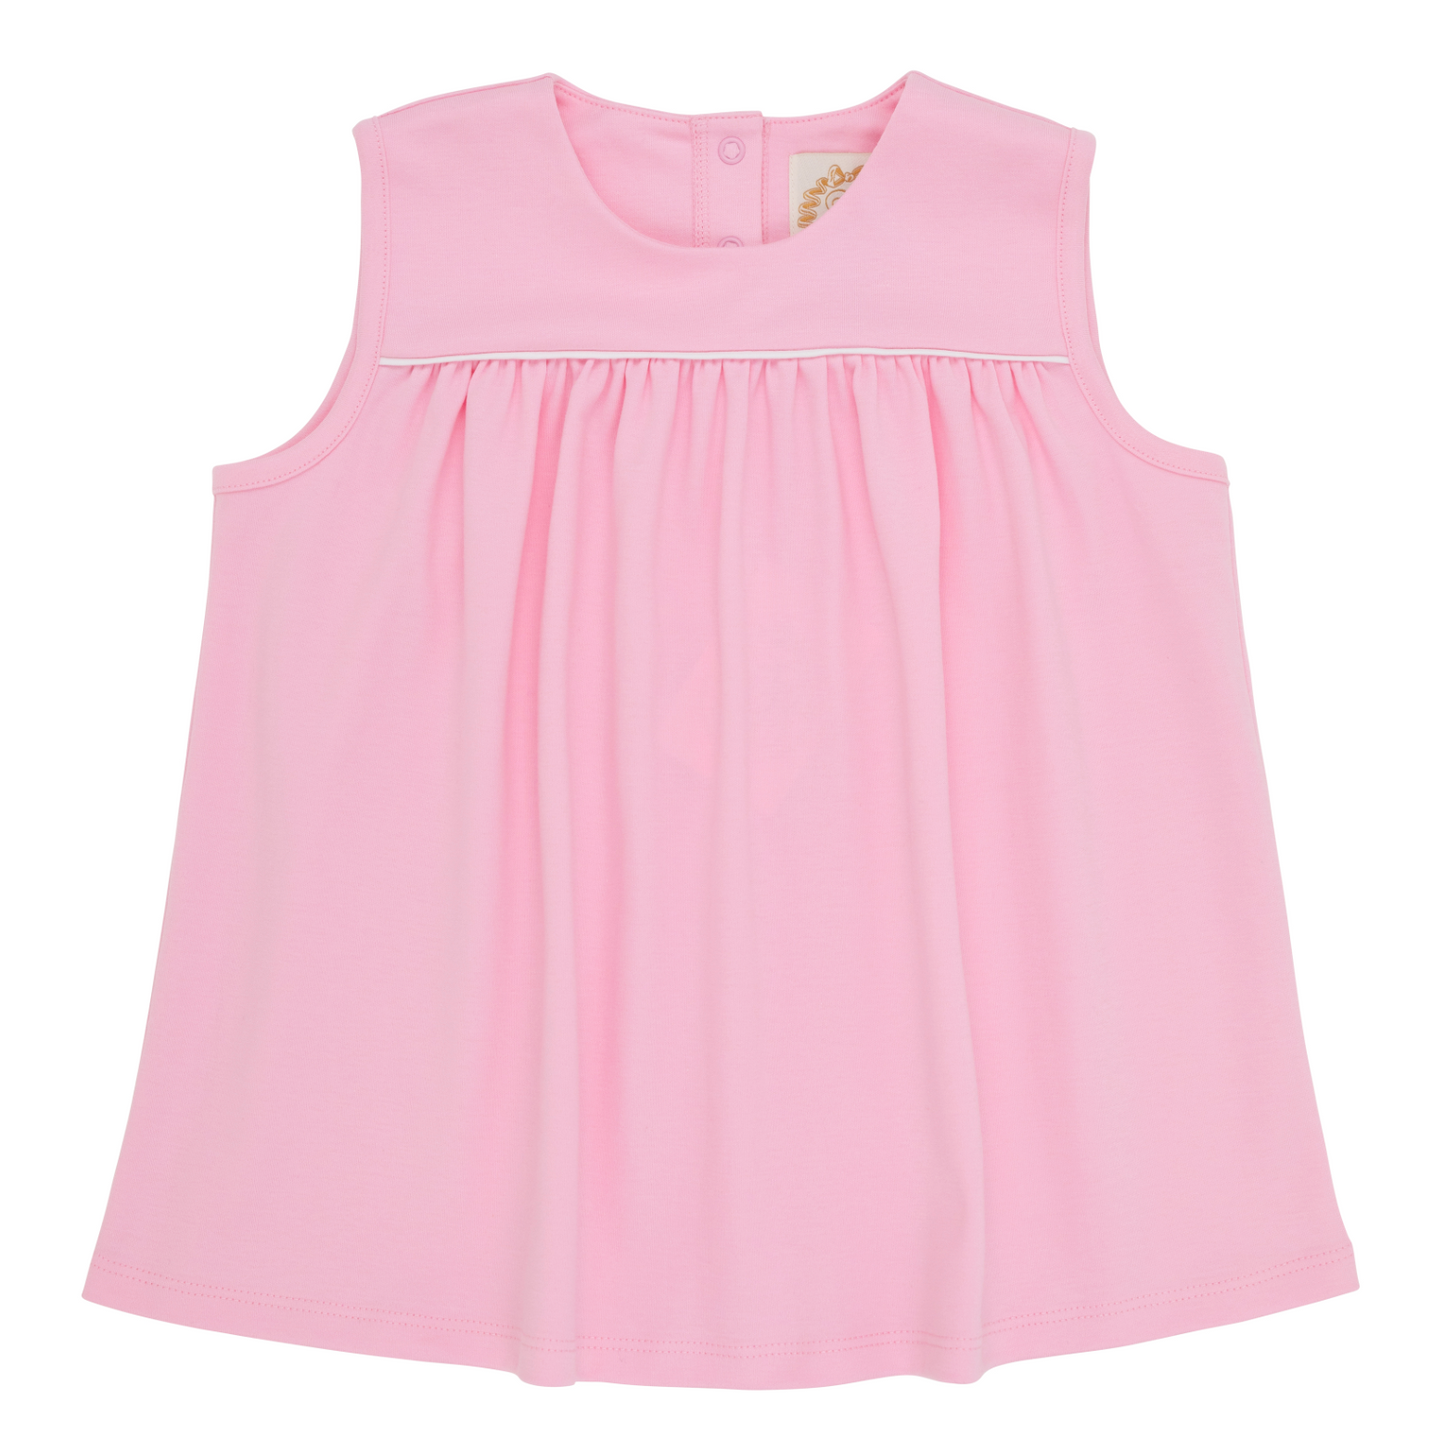 Dowell Day Top- Pier Party Pink/Worth Avenue White